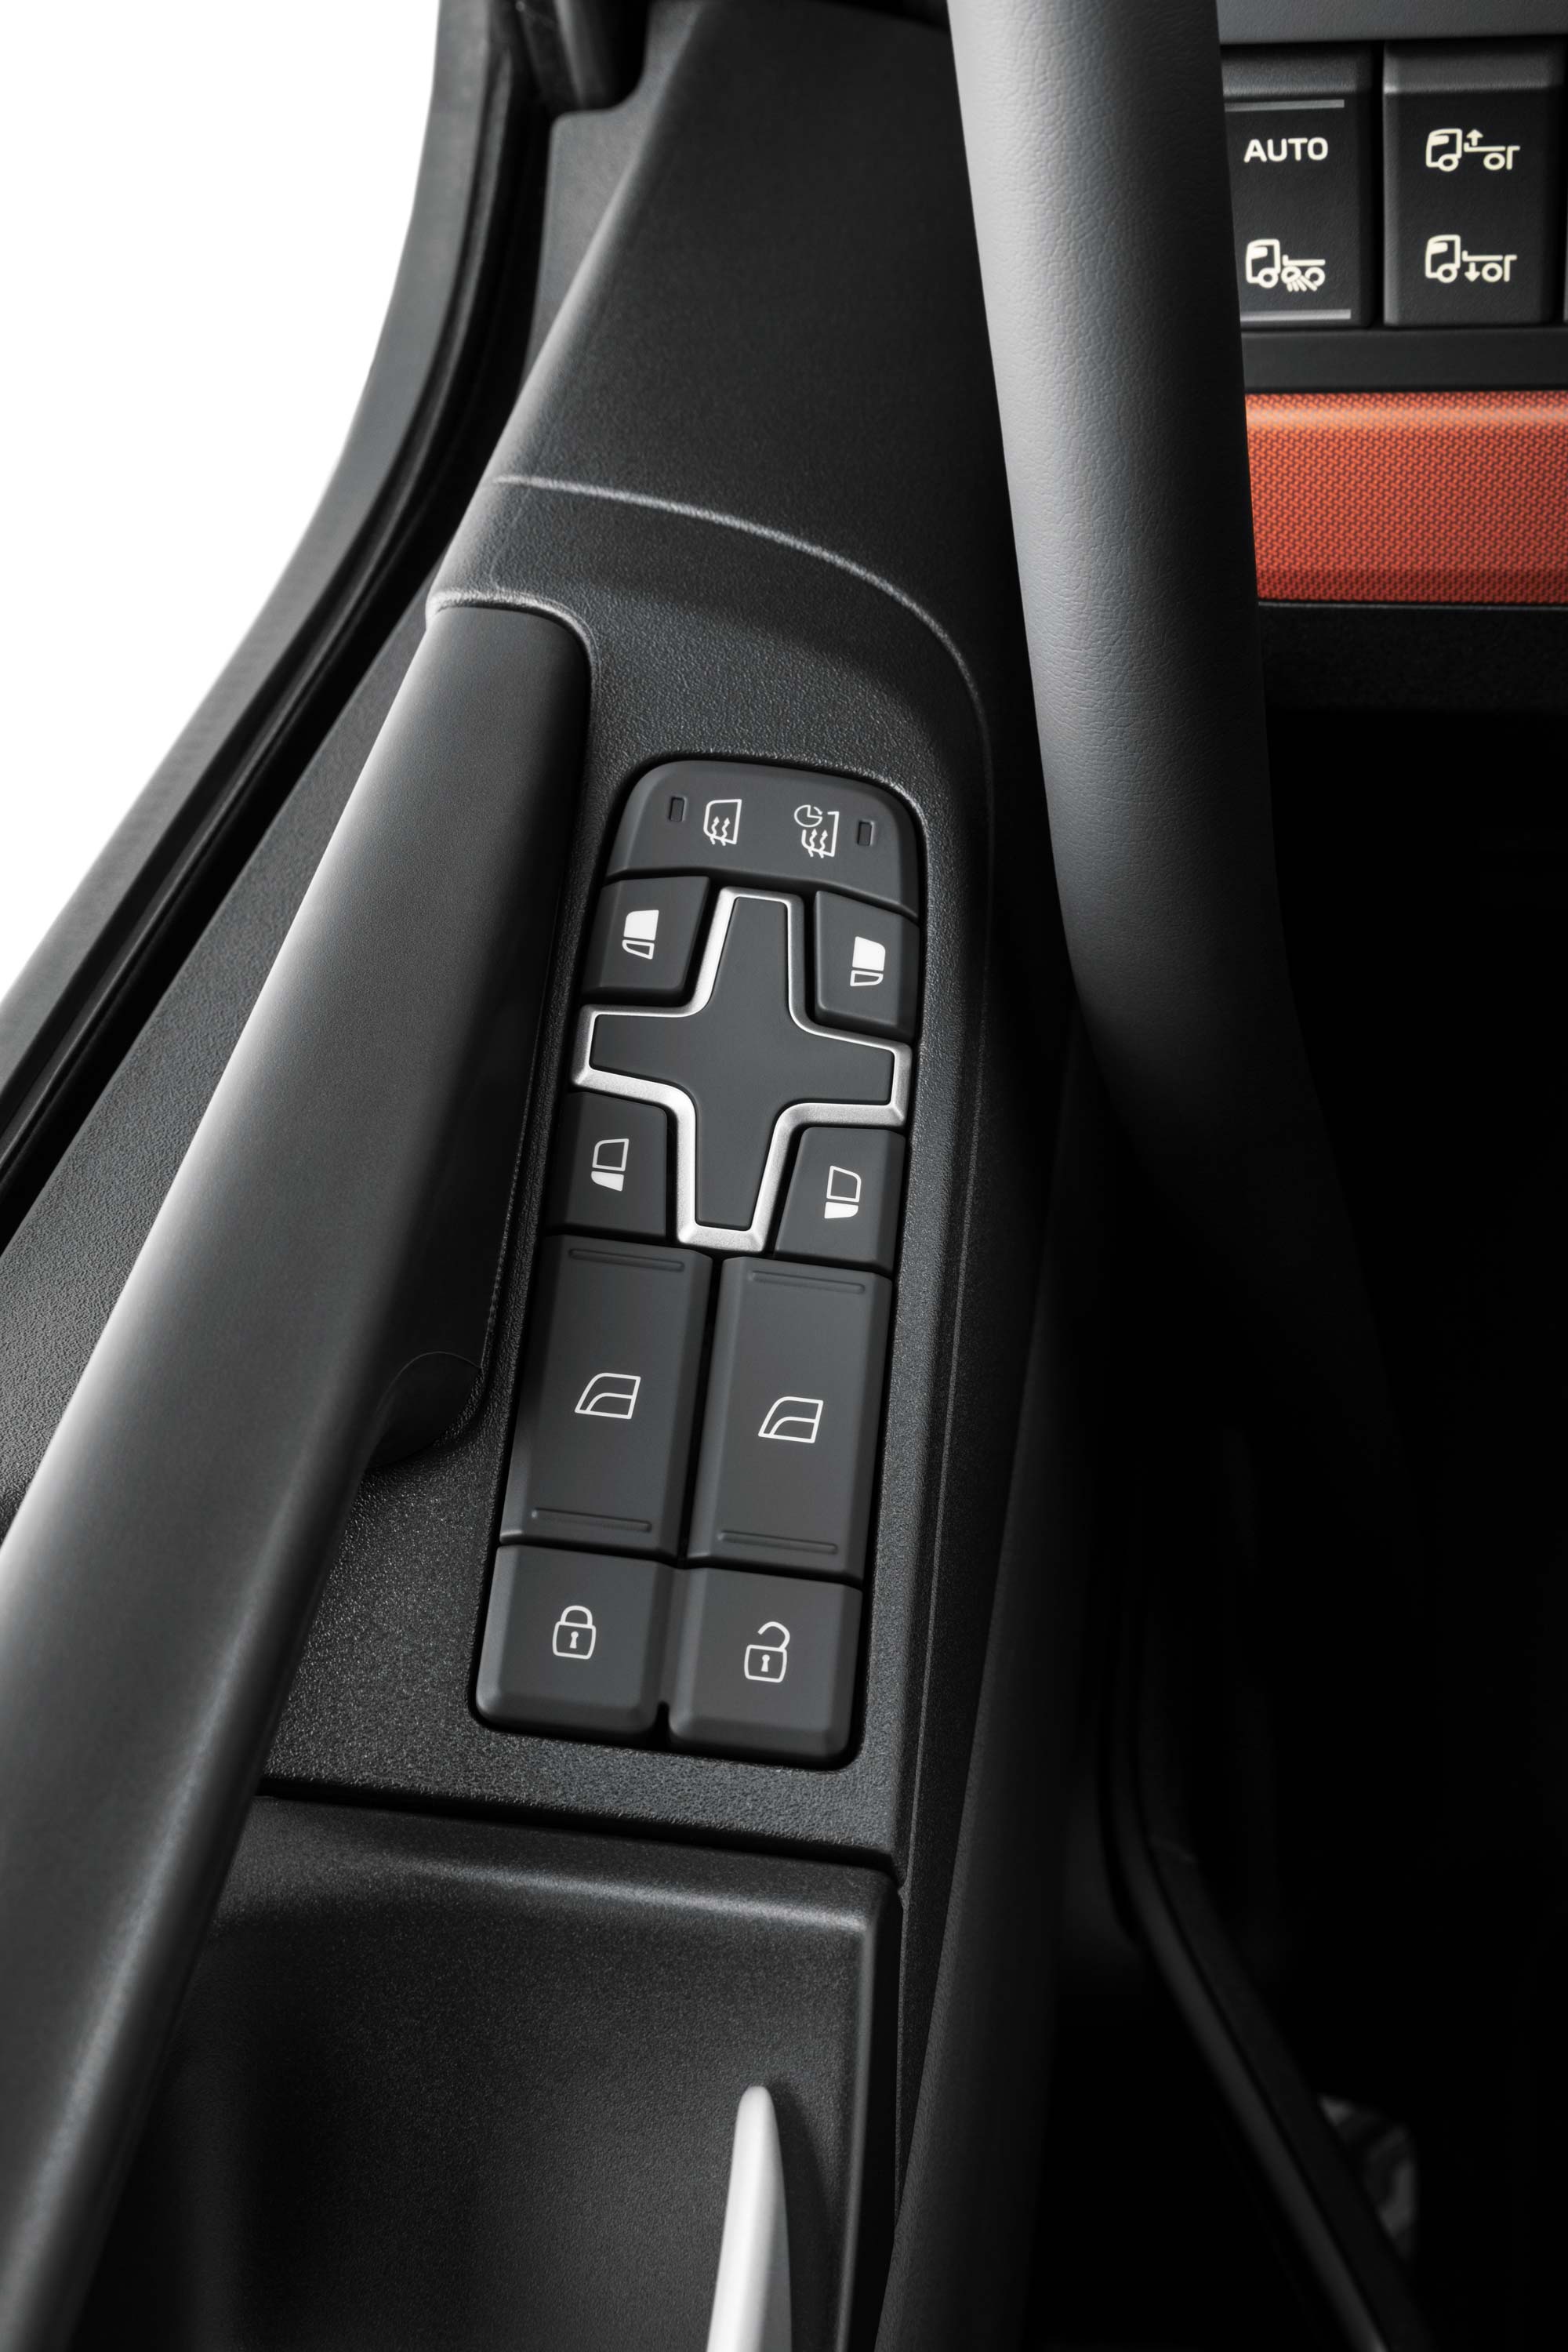 Controls integrated in the Volvo FH16 interior to facilitate easy access.